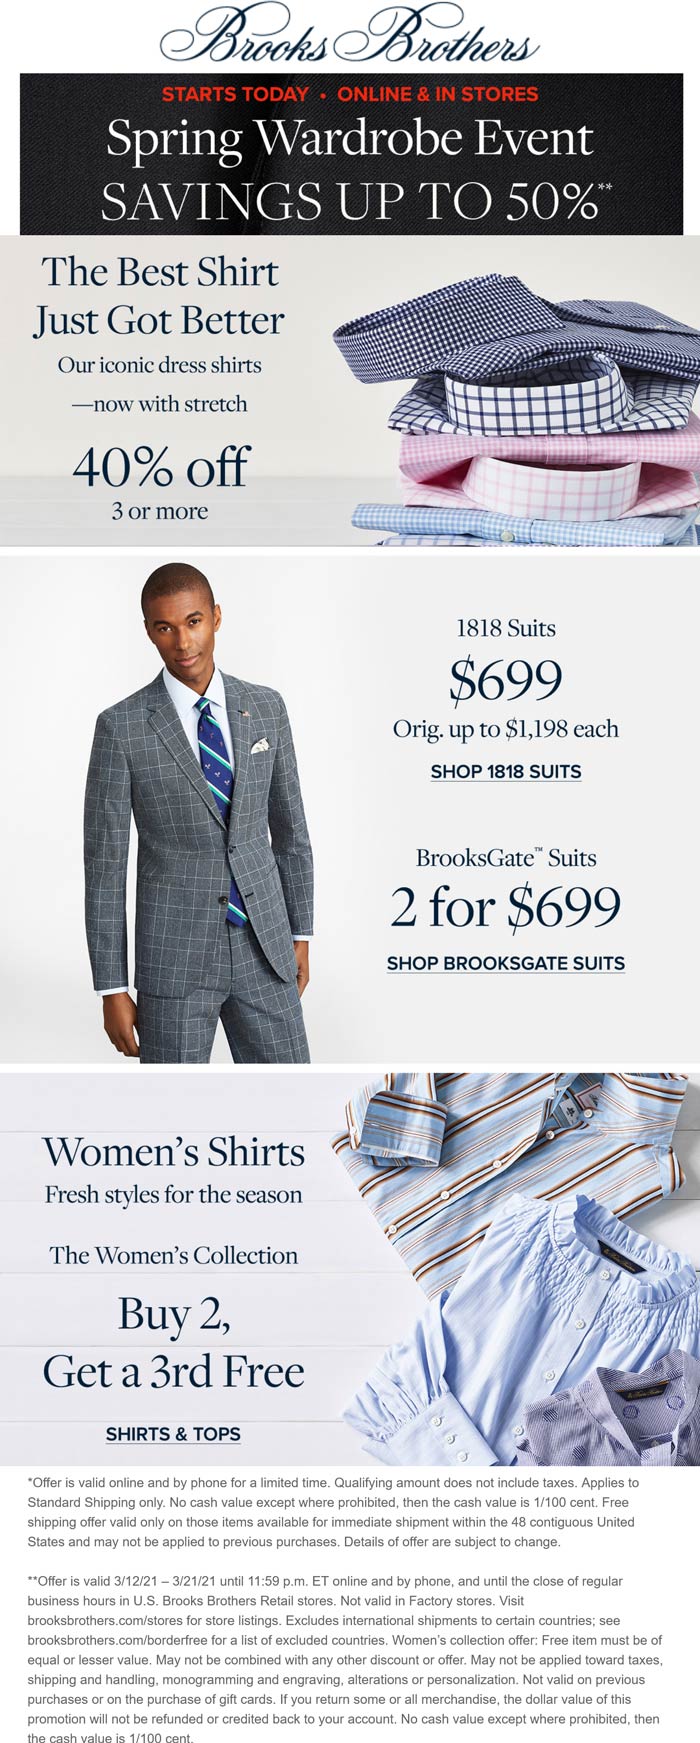 40 off 3+ shirts & more at Brooks Brothers, ditto online 